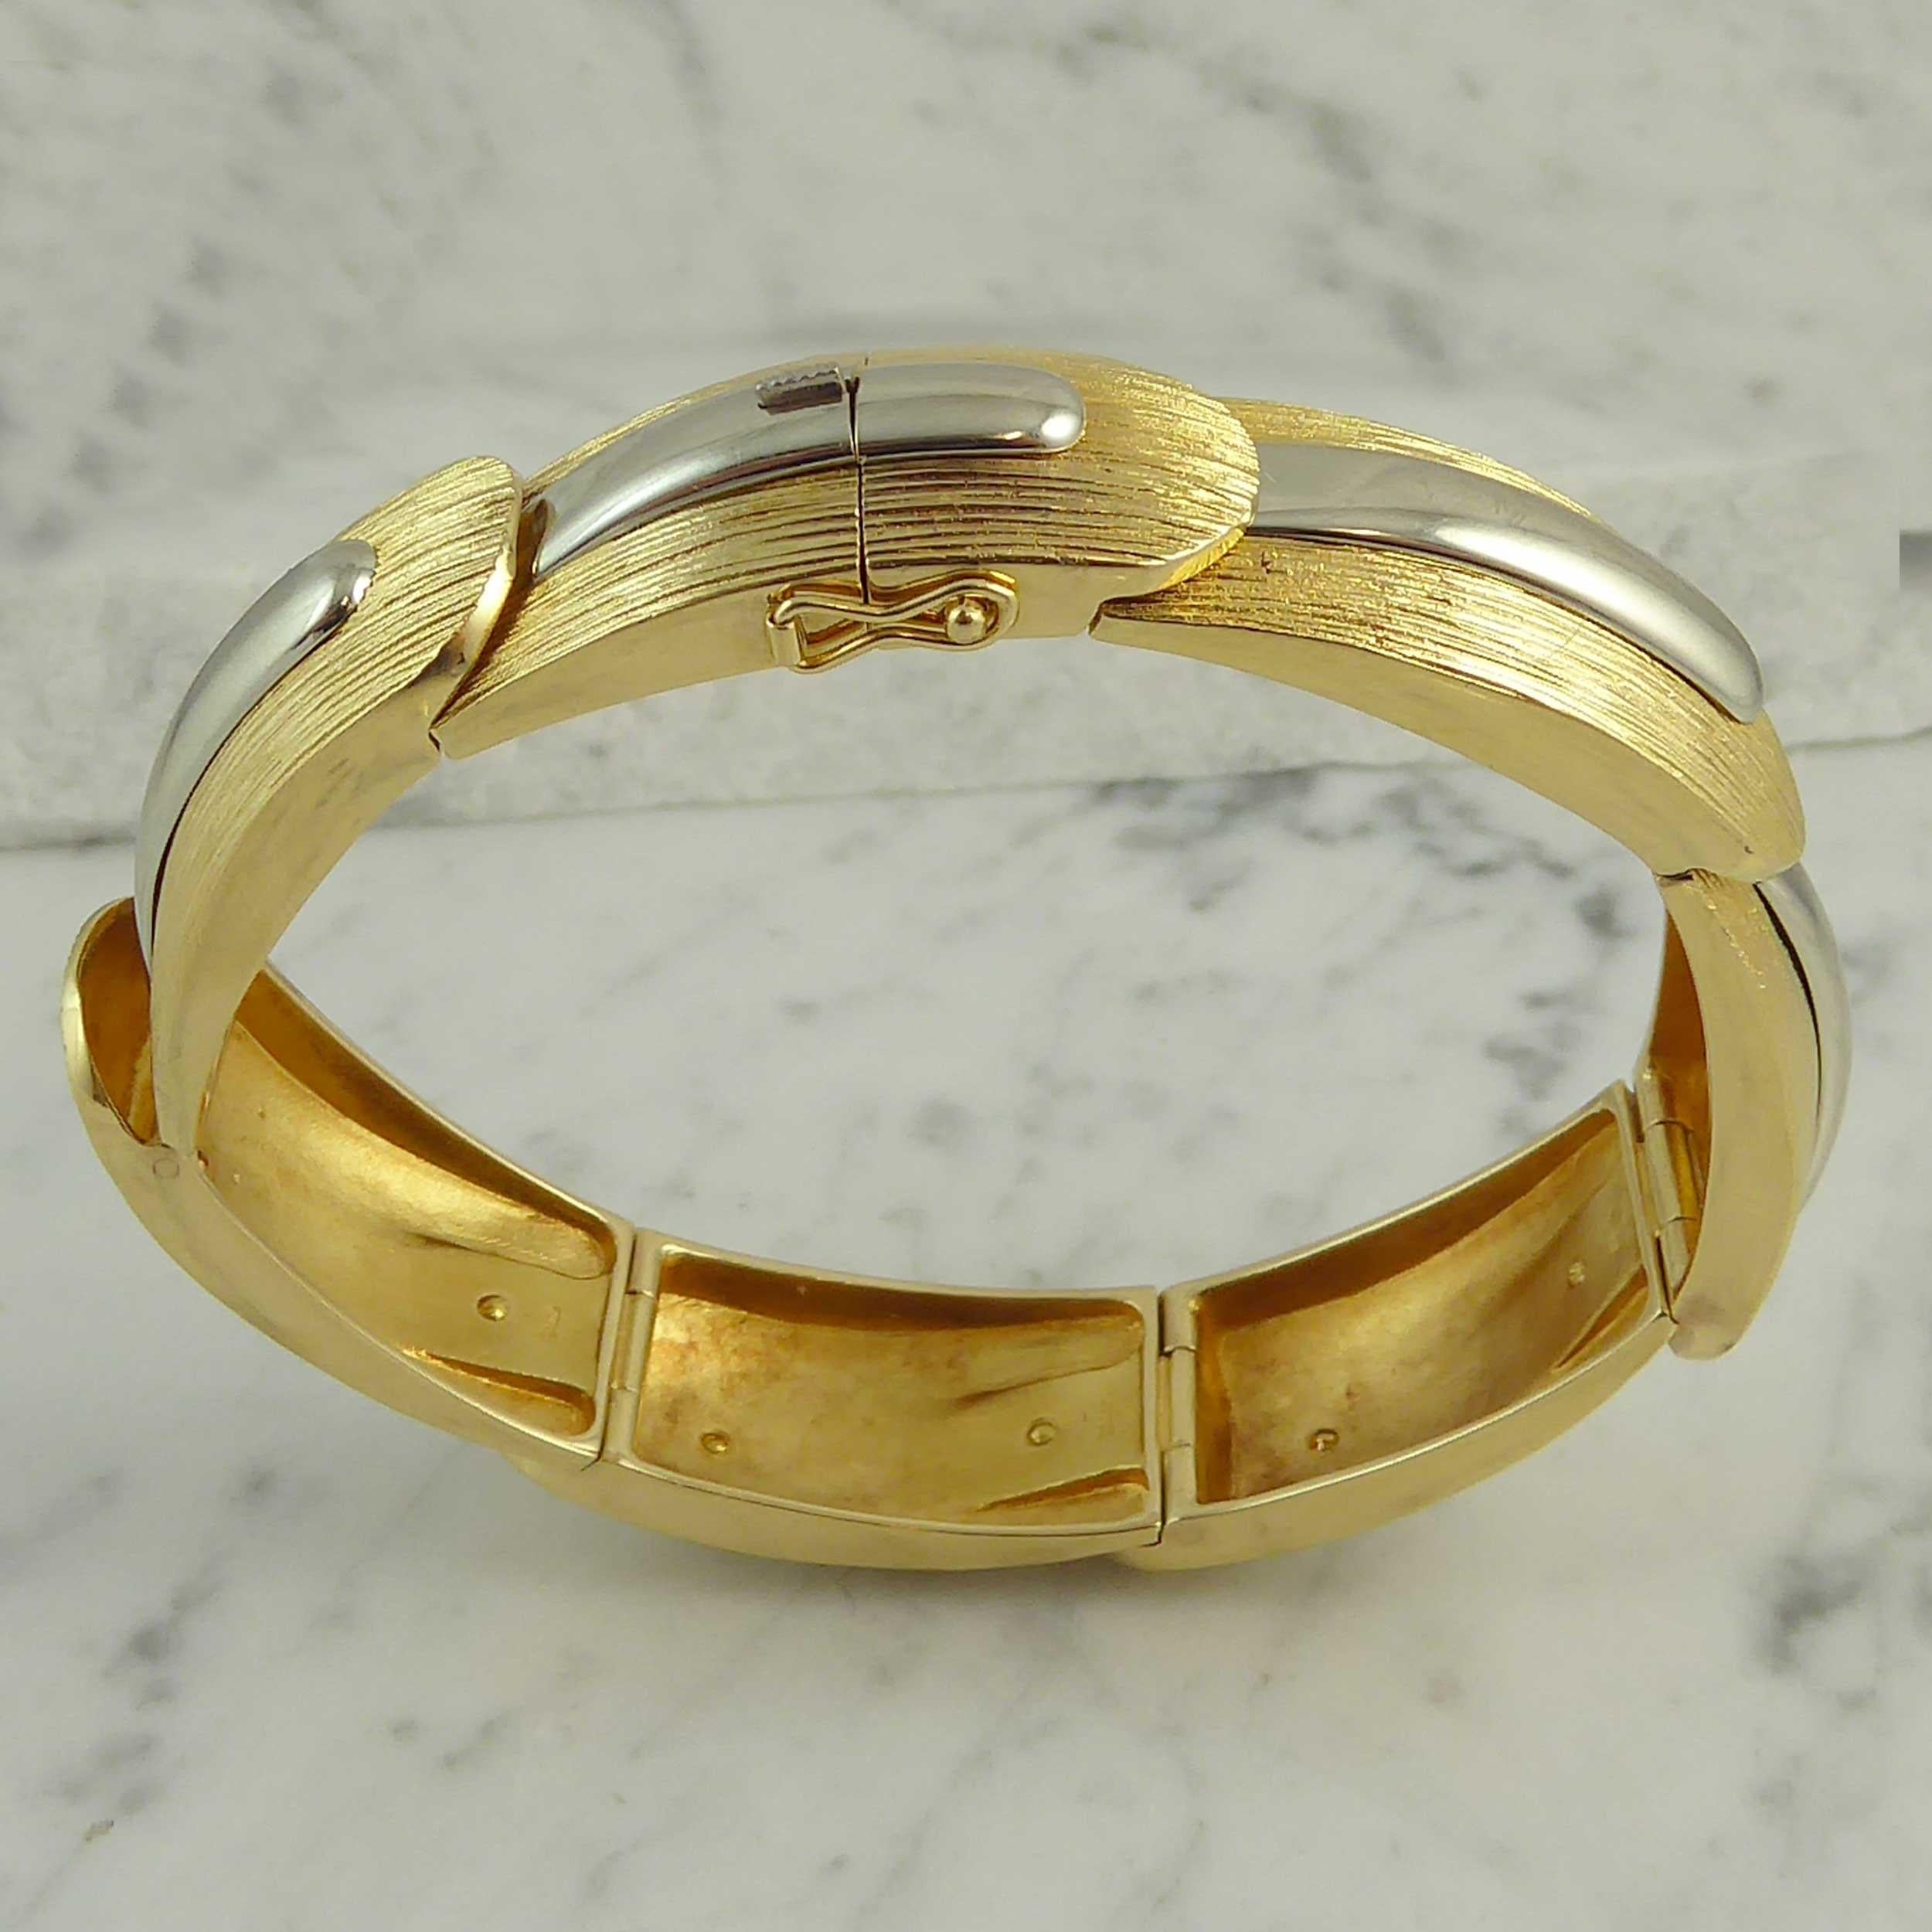 Vintage Designer Bracelet 1974, Lapponia Finland, Yellow and White Gold, Nordic For Sale 4